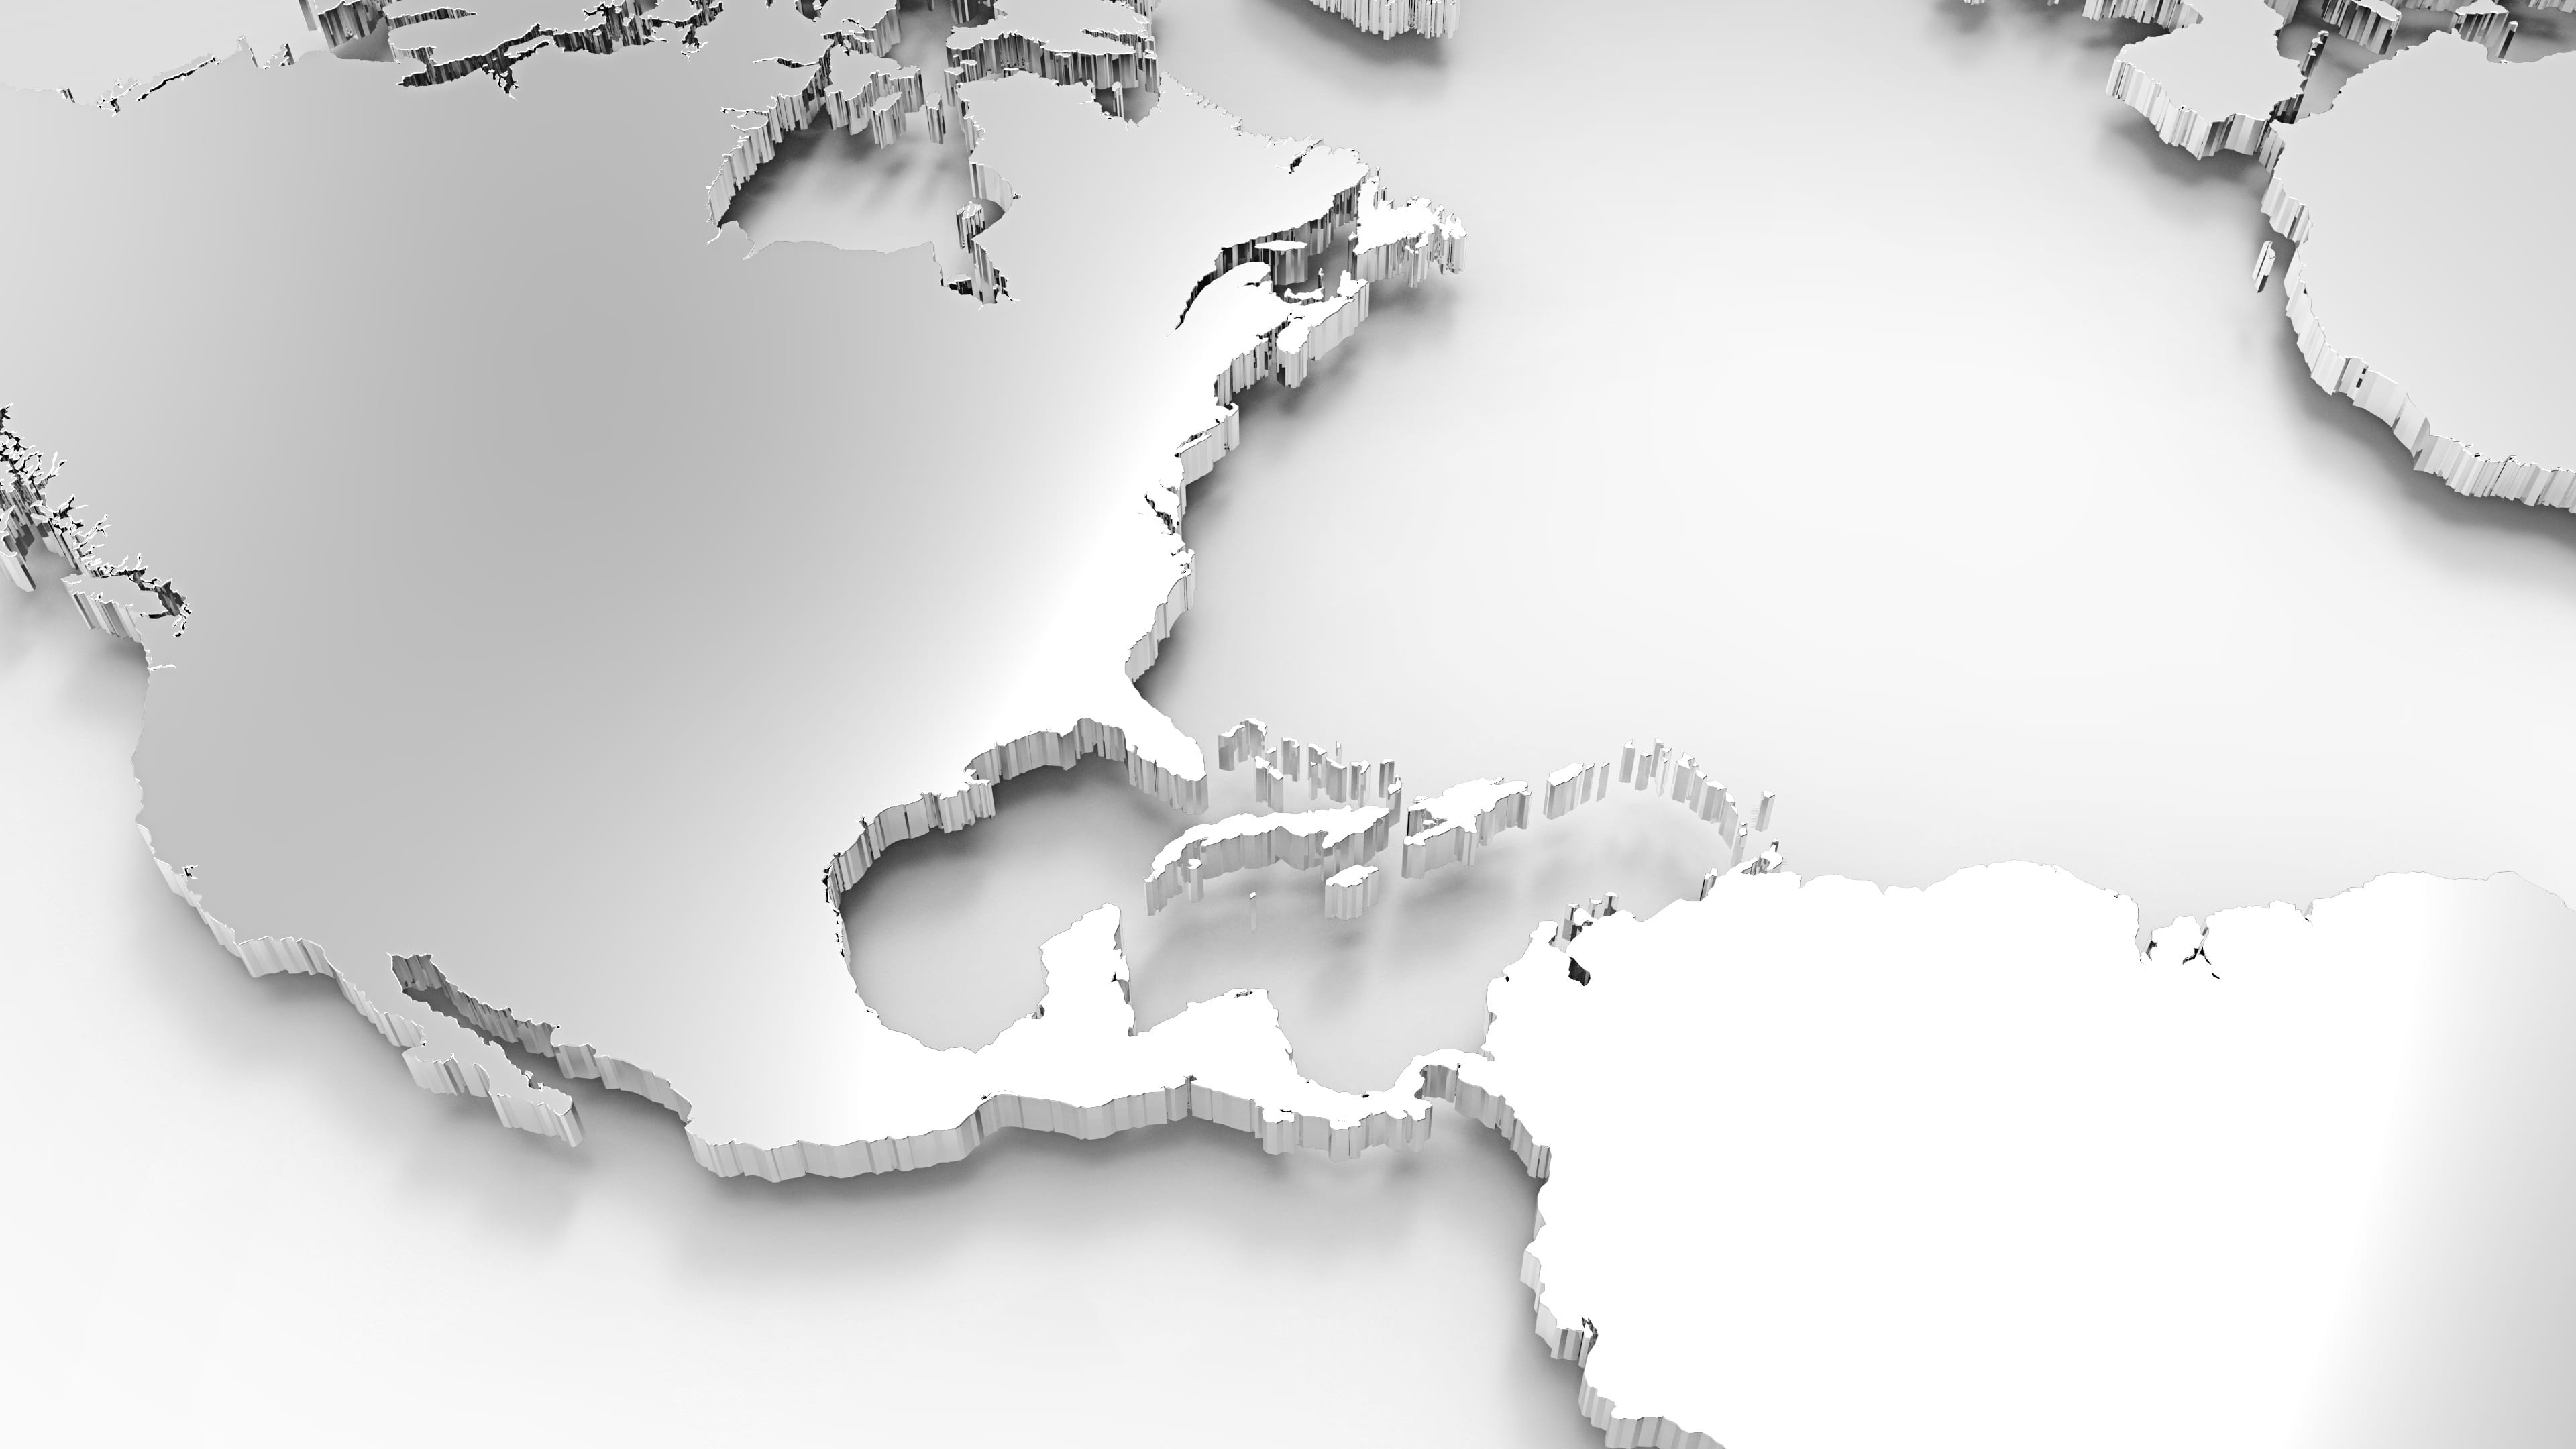 white world map illustration, 3d model, earth, geography, education